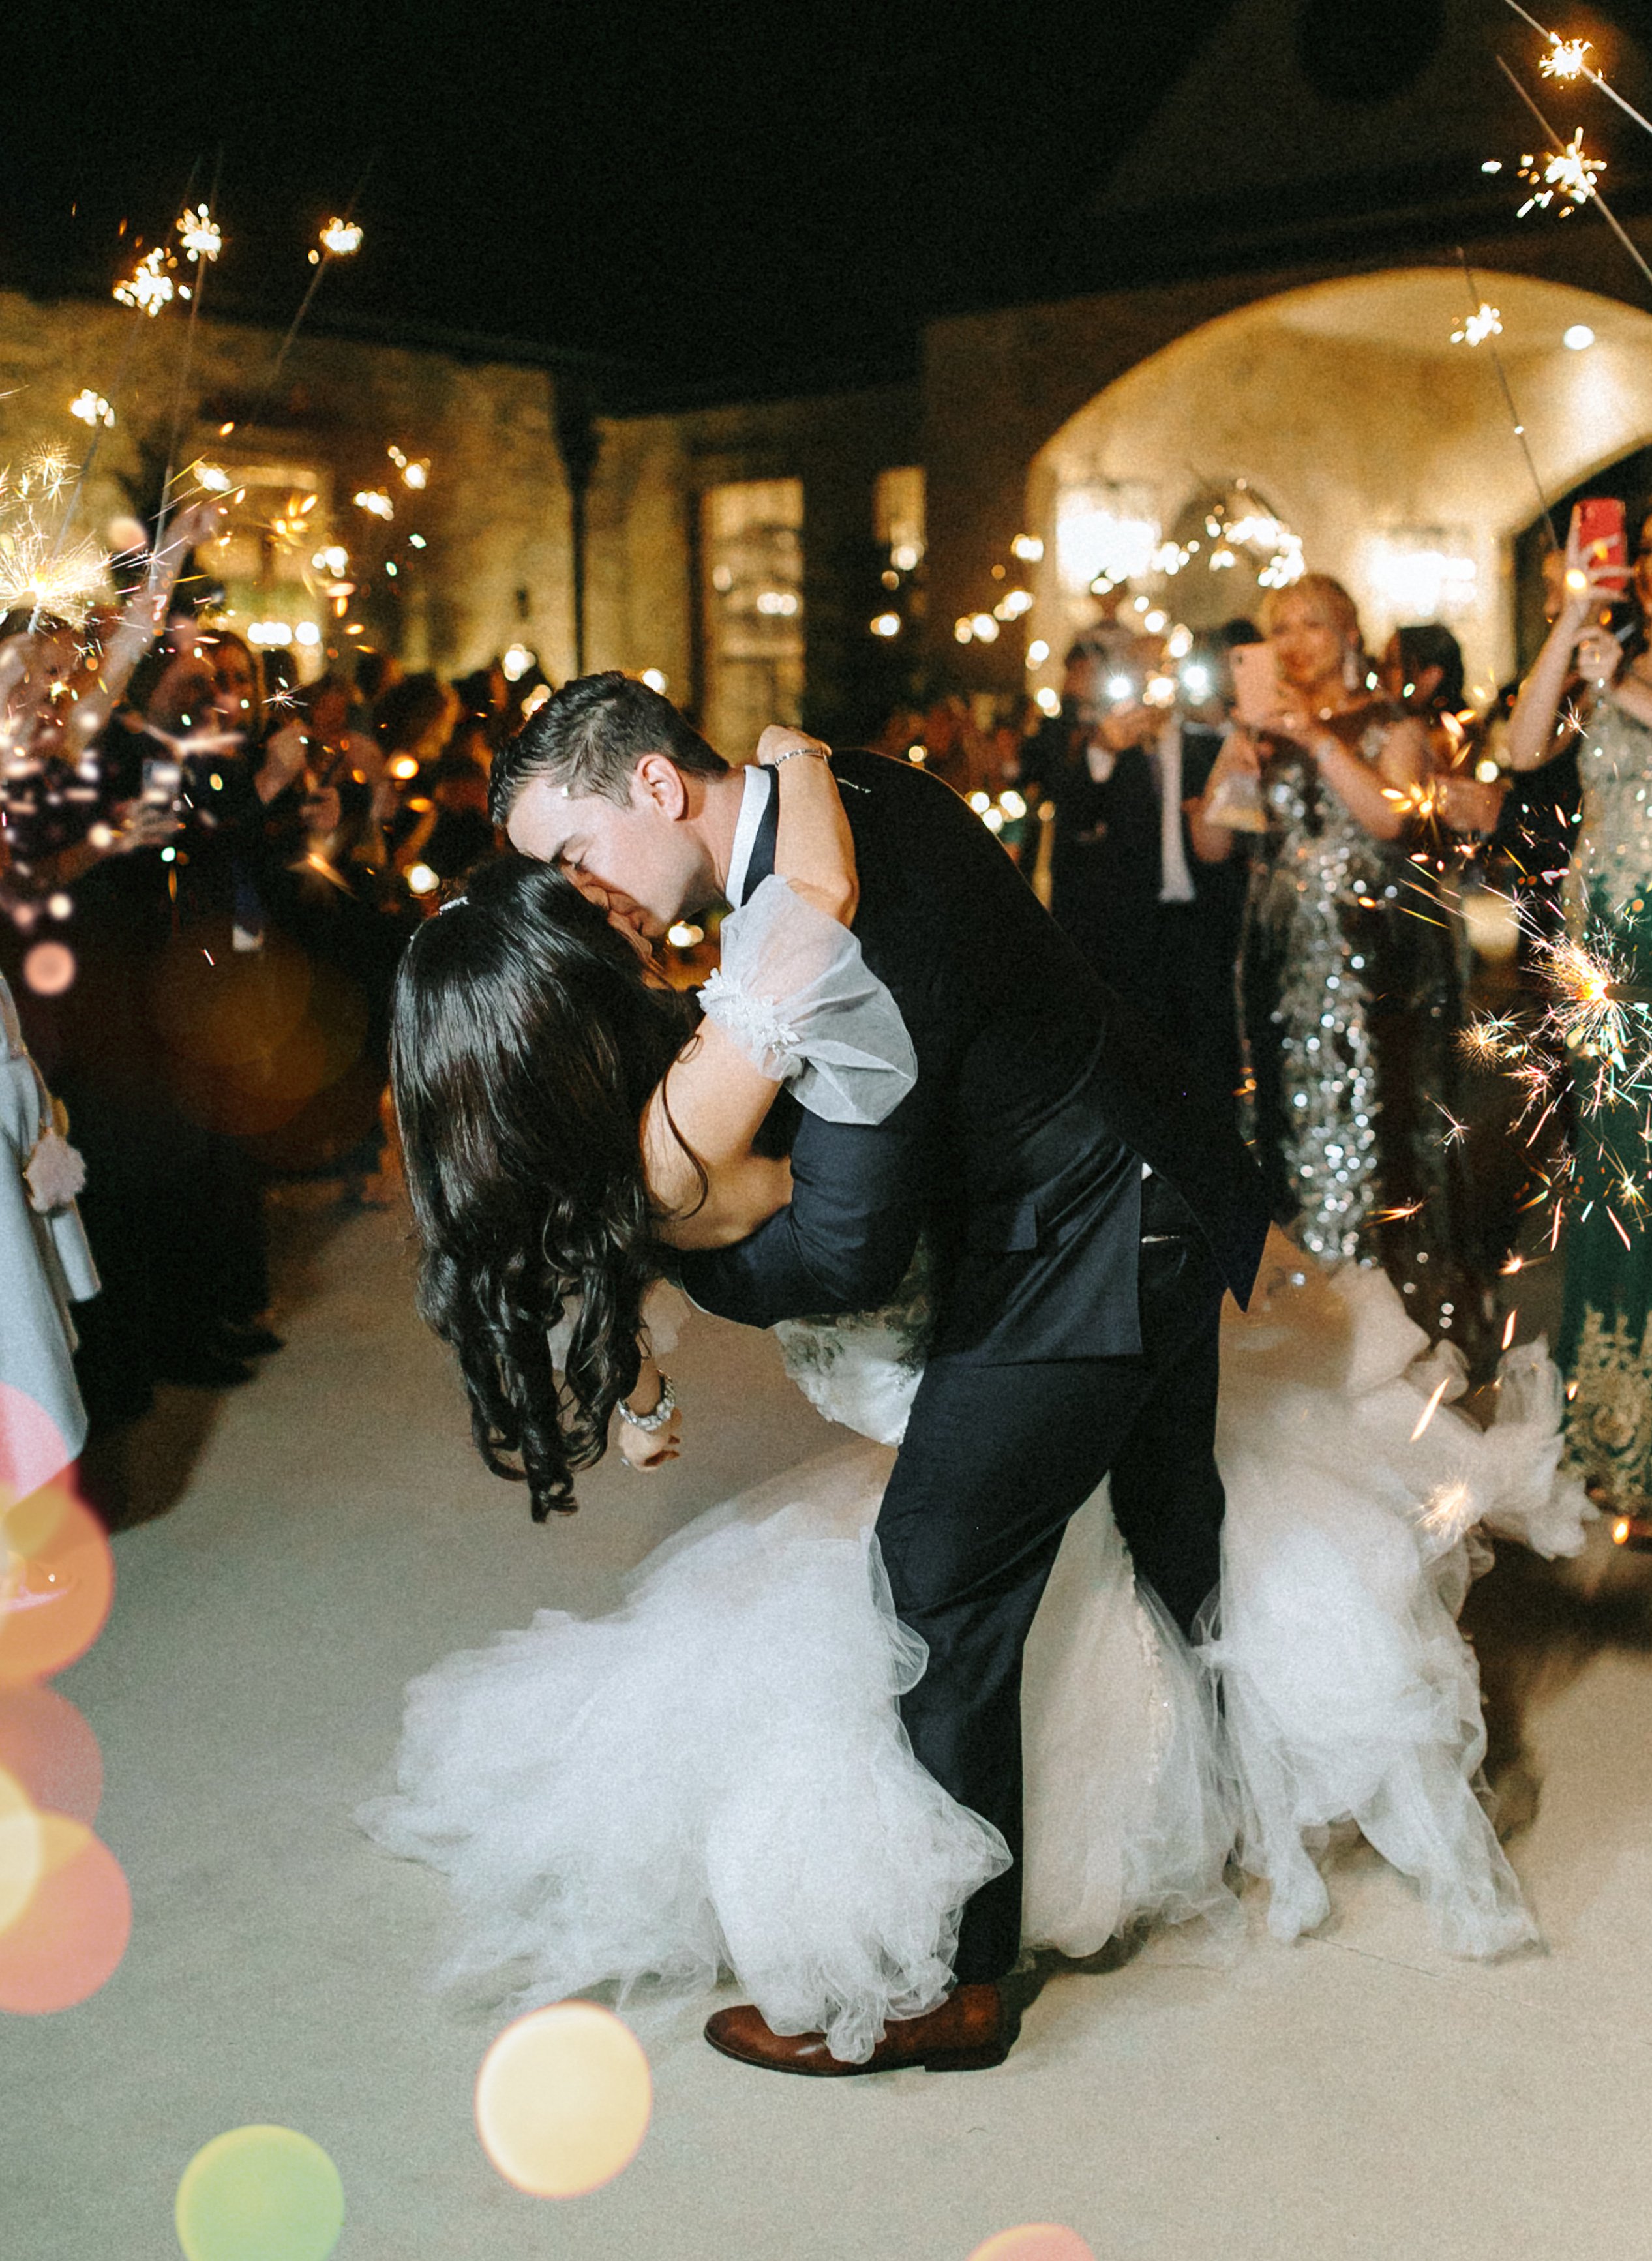 A groom dips his bride in the middle of their guests who are holding out sparklers for their wedding send-off.